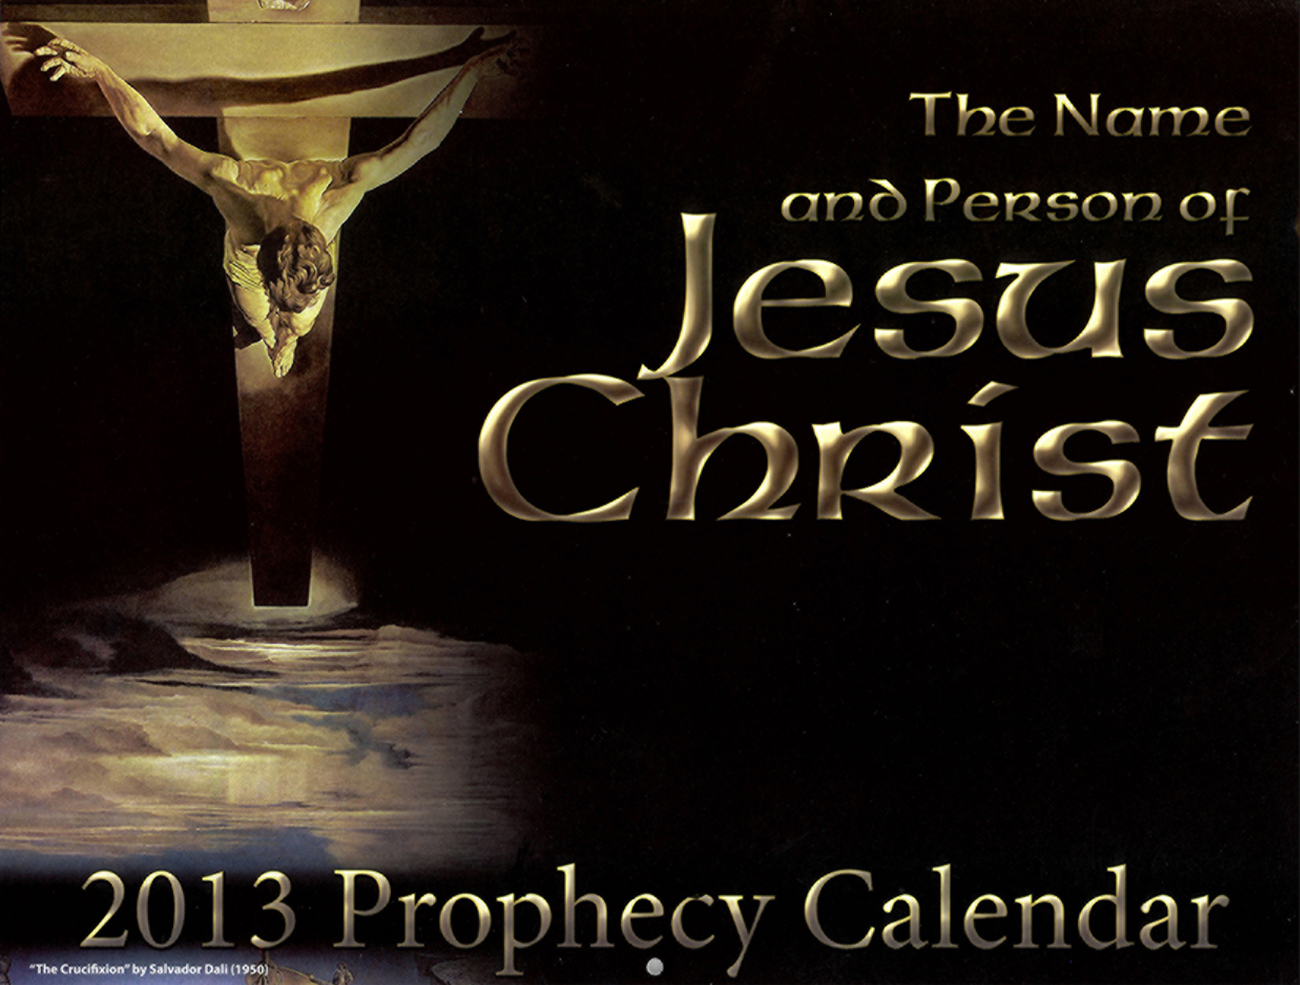 Front Cover: 2013 Prophecy Calendar: The Name and Person of Jesus Christ